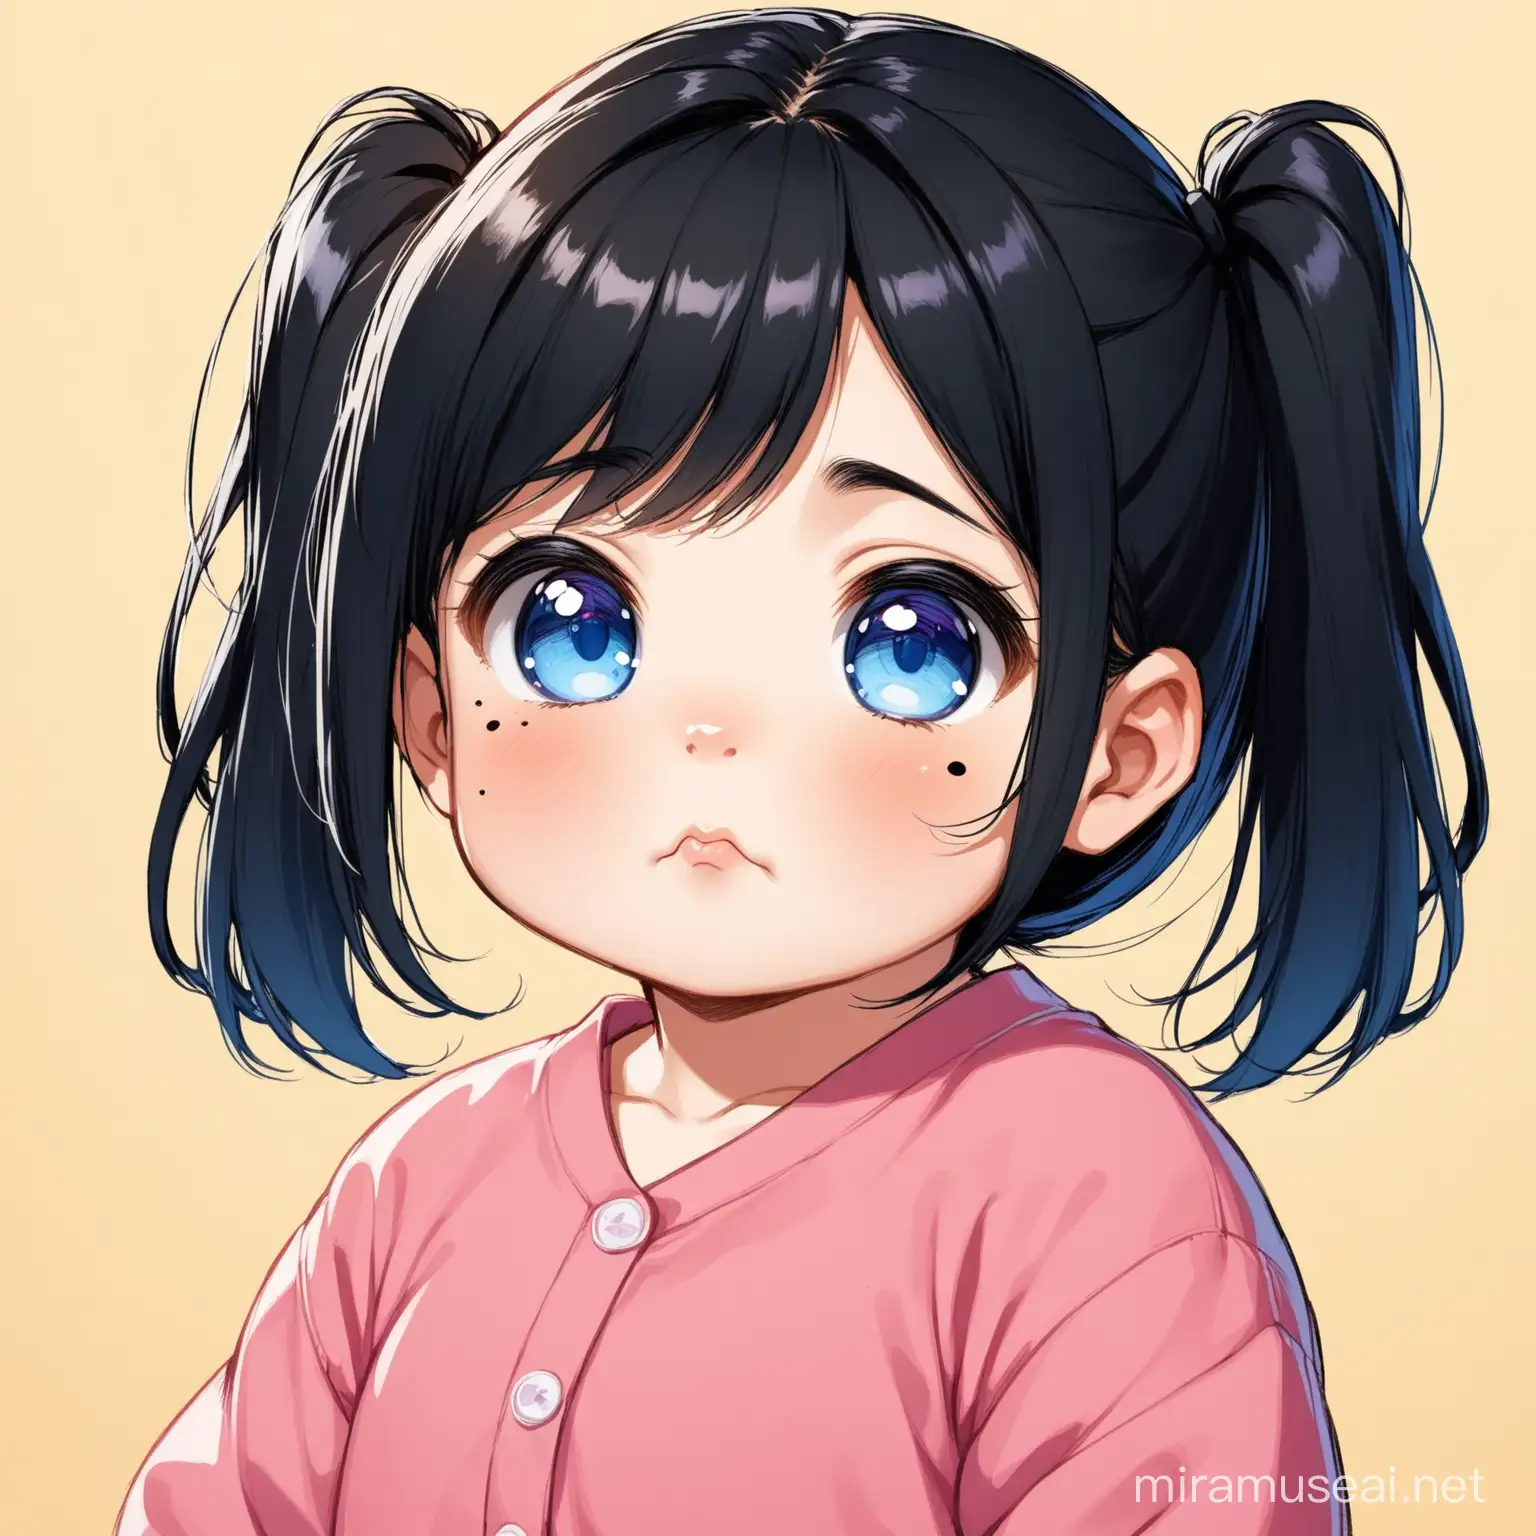 Adorable Toddler with Raven Black Hair and Blue Eyes in Pigtails